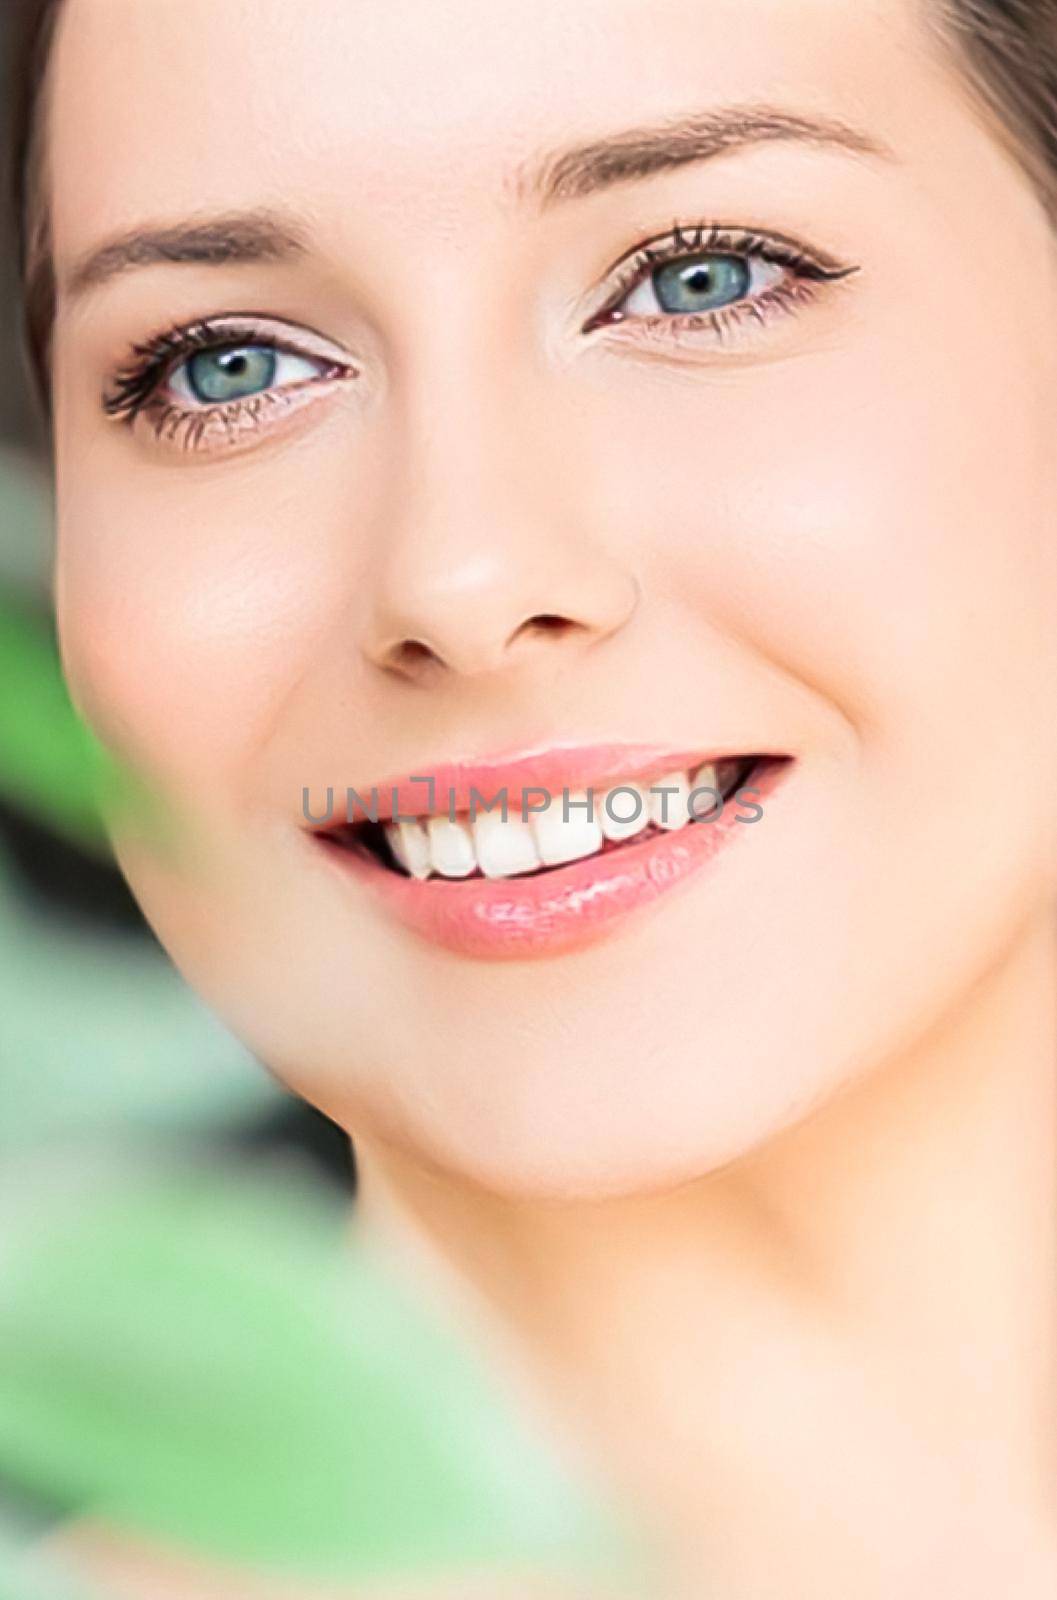 Natural beauty, perfect white teeth and healthy smile, beautiful woman in nature for skincare cosmetics and dental care, close-up portrait